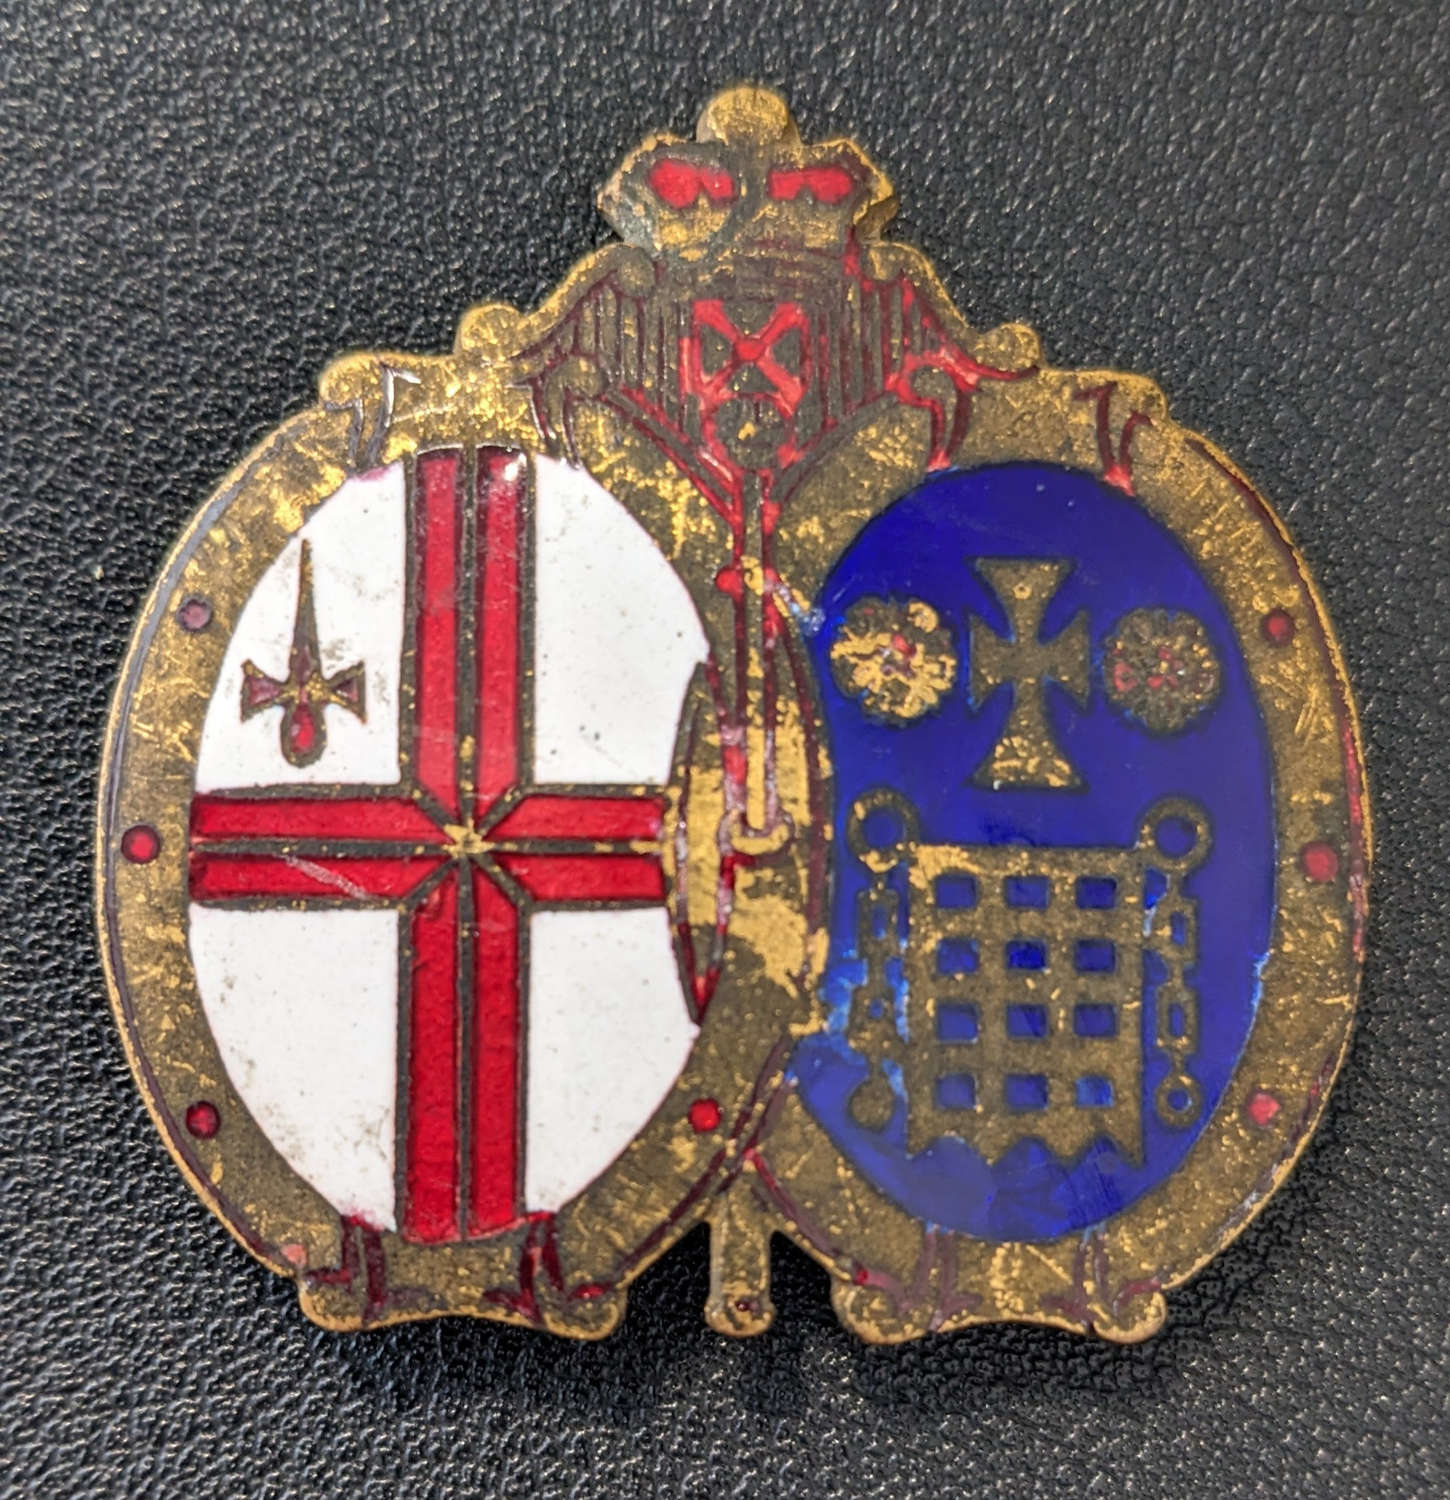 Victorian Possible Derry/Londonderry Related Enamel & Gilt Badge